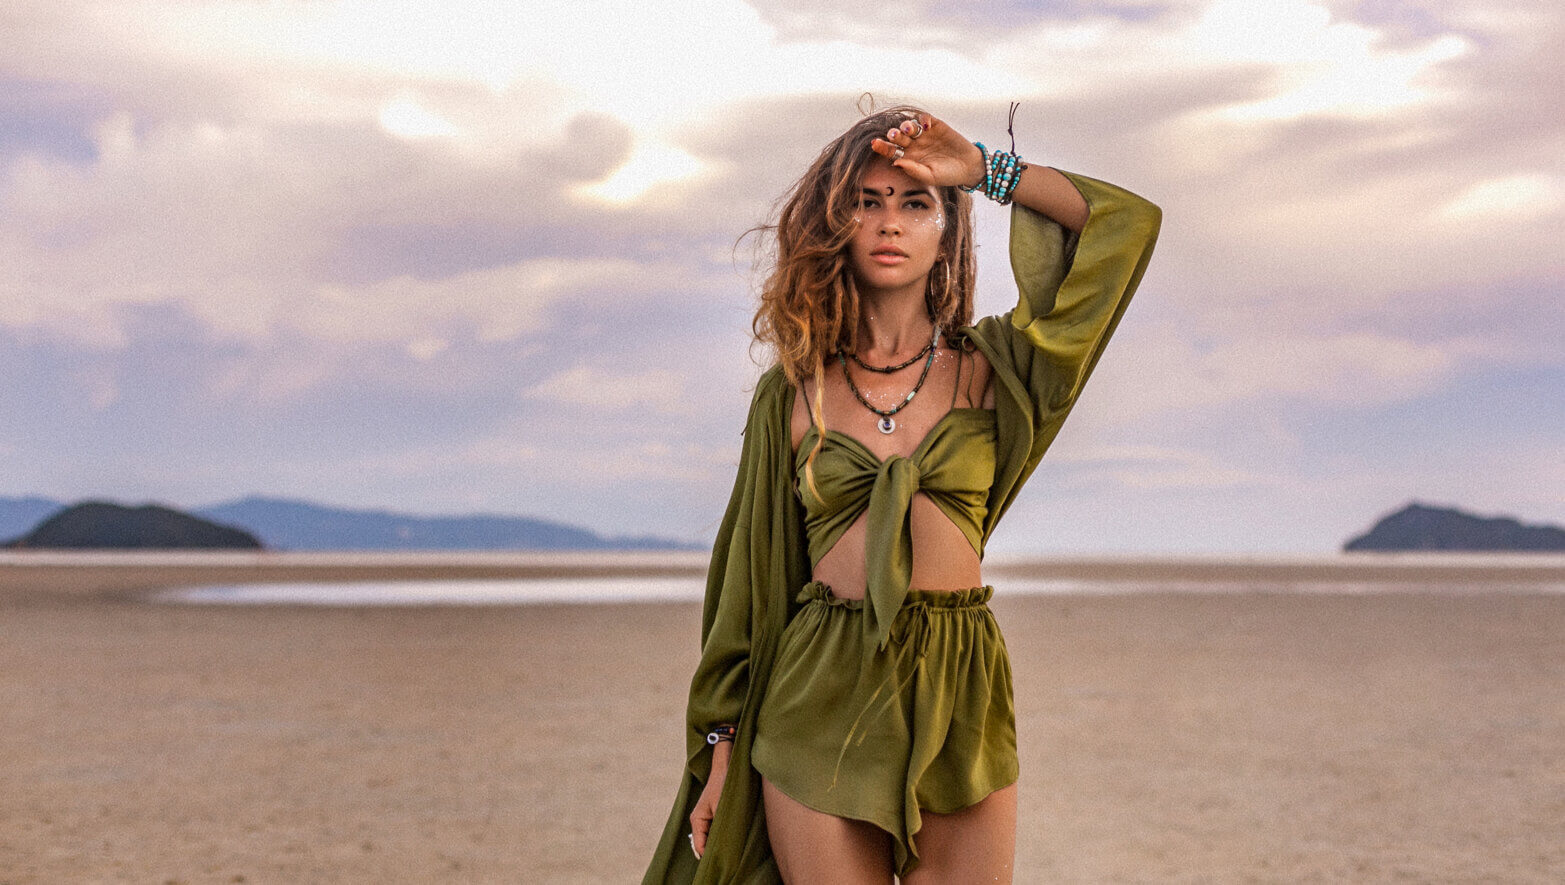 Image of a beautiful young woman in stylish costume on the beach at sunset